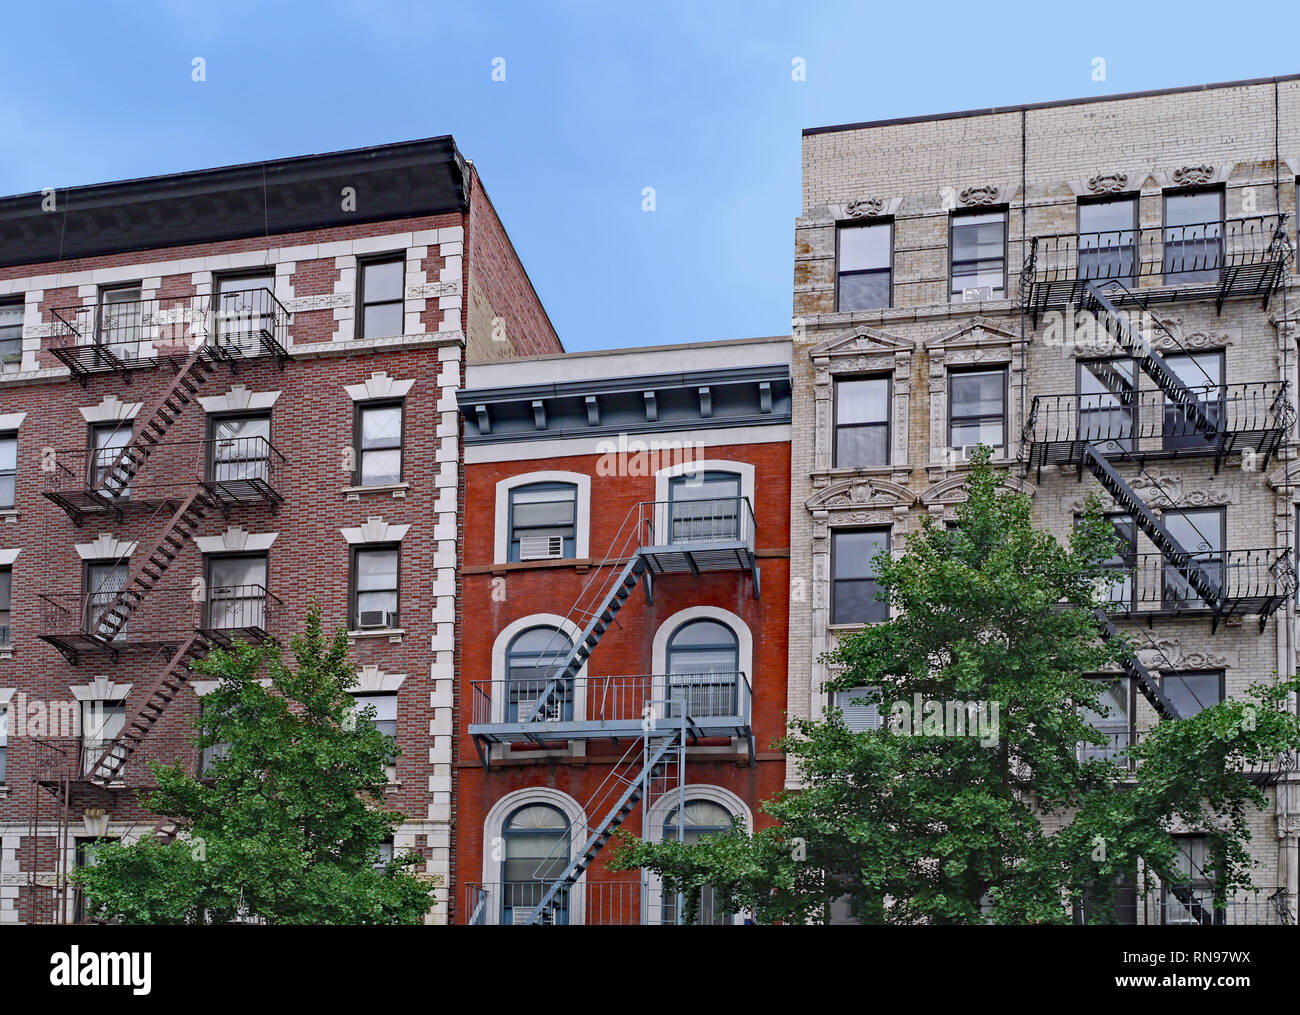 old New York apartment building with external fire escapes, window air conditioners, and ornate trim around windows Stock Photo